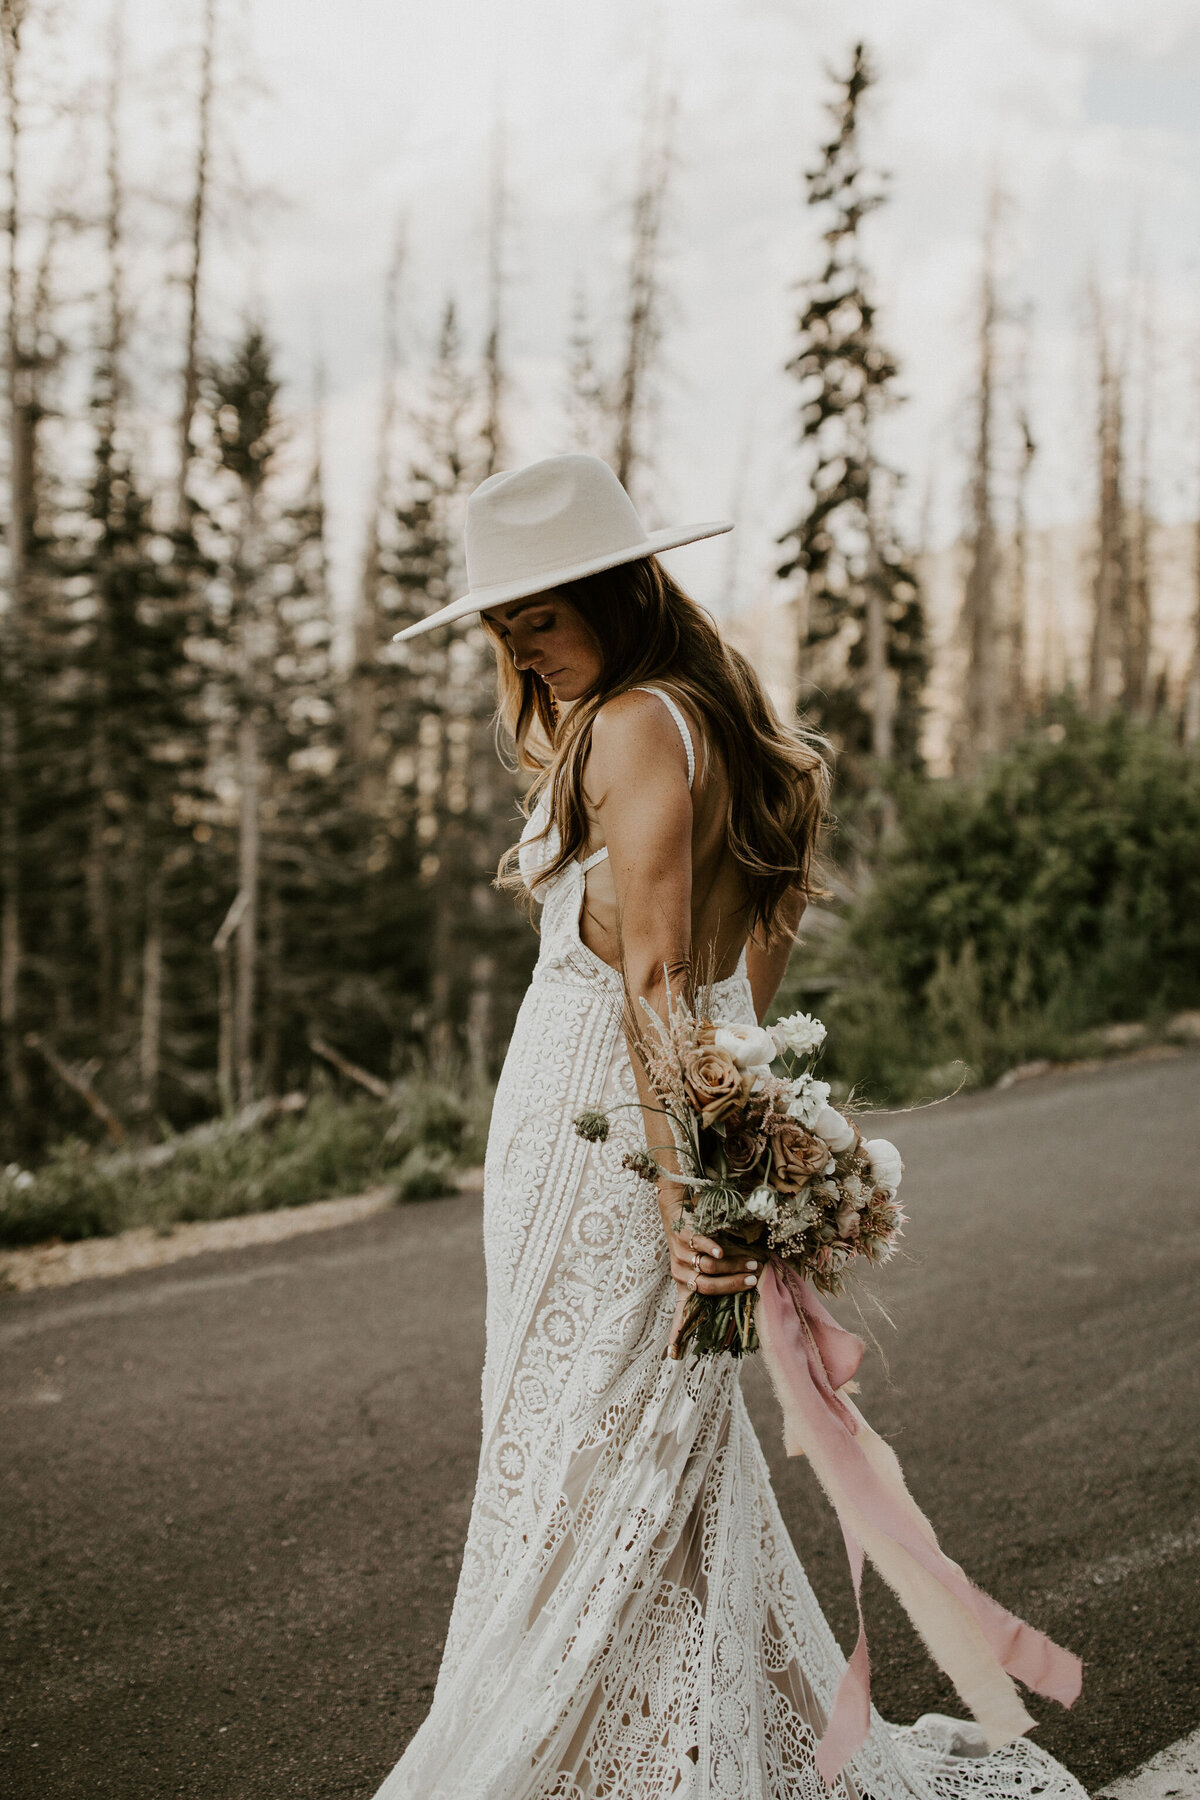 A bride wearing a white wedding gown and hat, holding a bouquet of blush and white roses on a road with trees in the background.